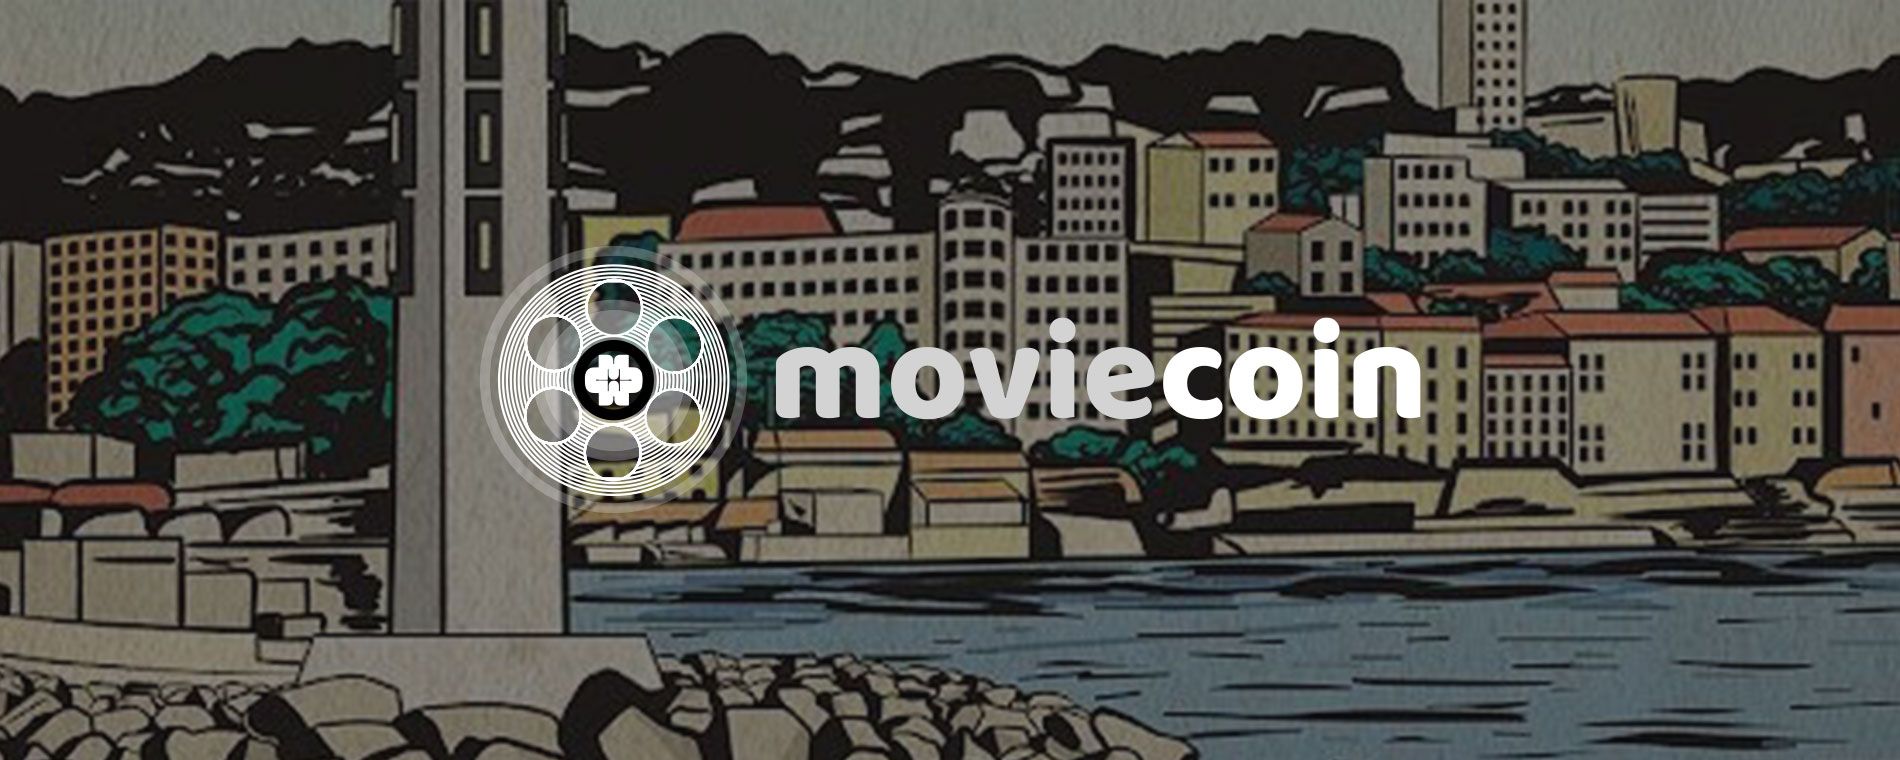 Moviecoin NFTs let you become a film investor